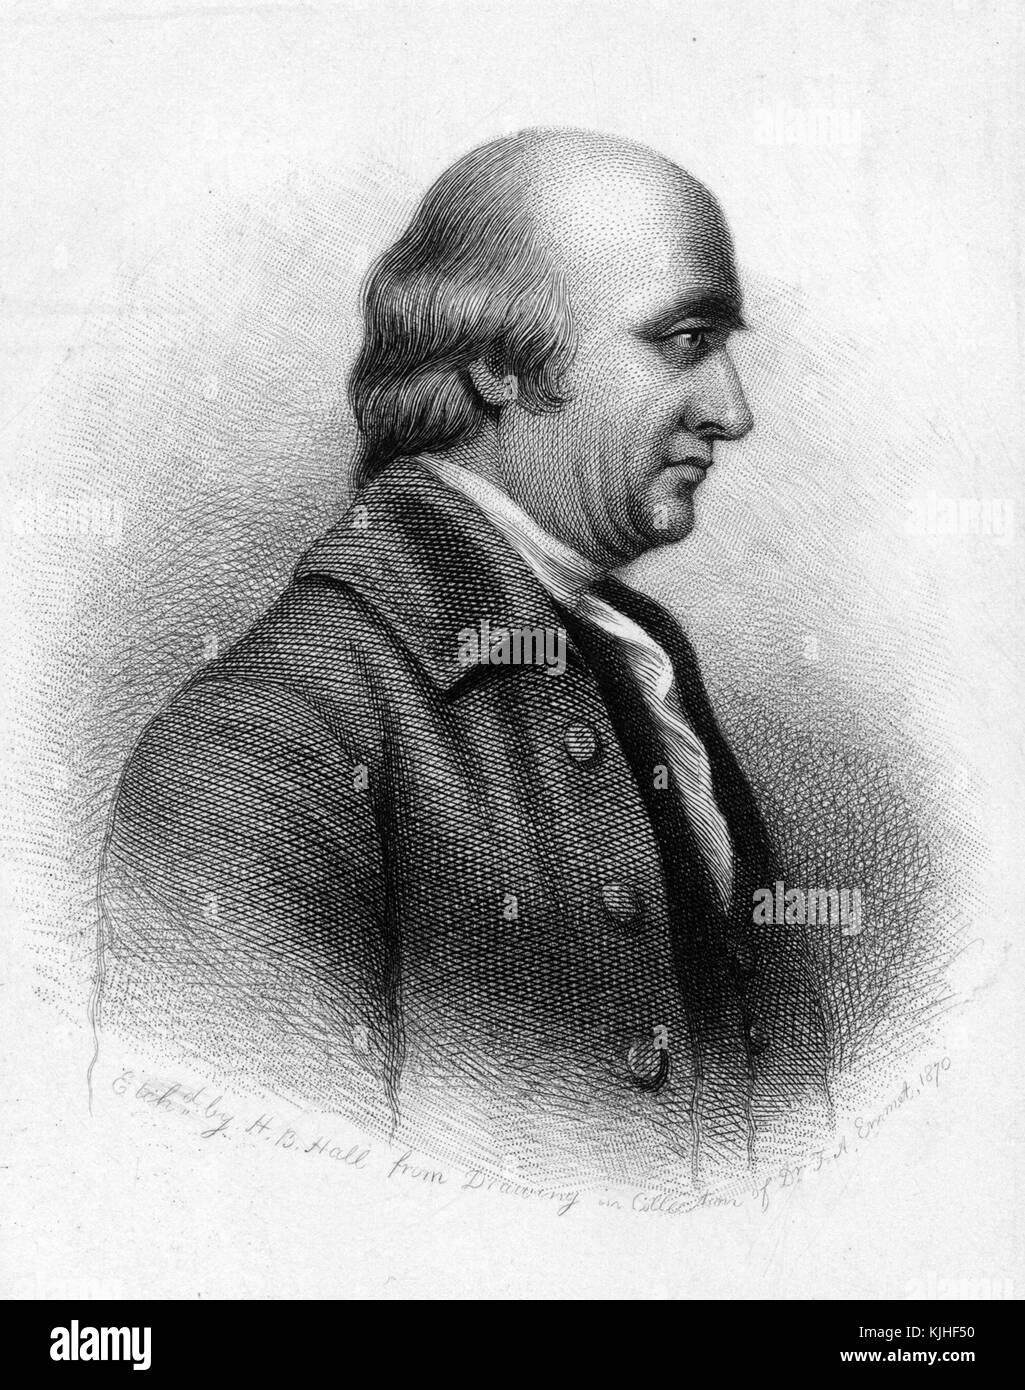 An etching of a man identified only as Hook, he is wearing a dark suit and white shirt, 1830. From the New York Public Library. Stock Photo